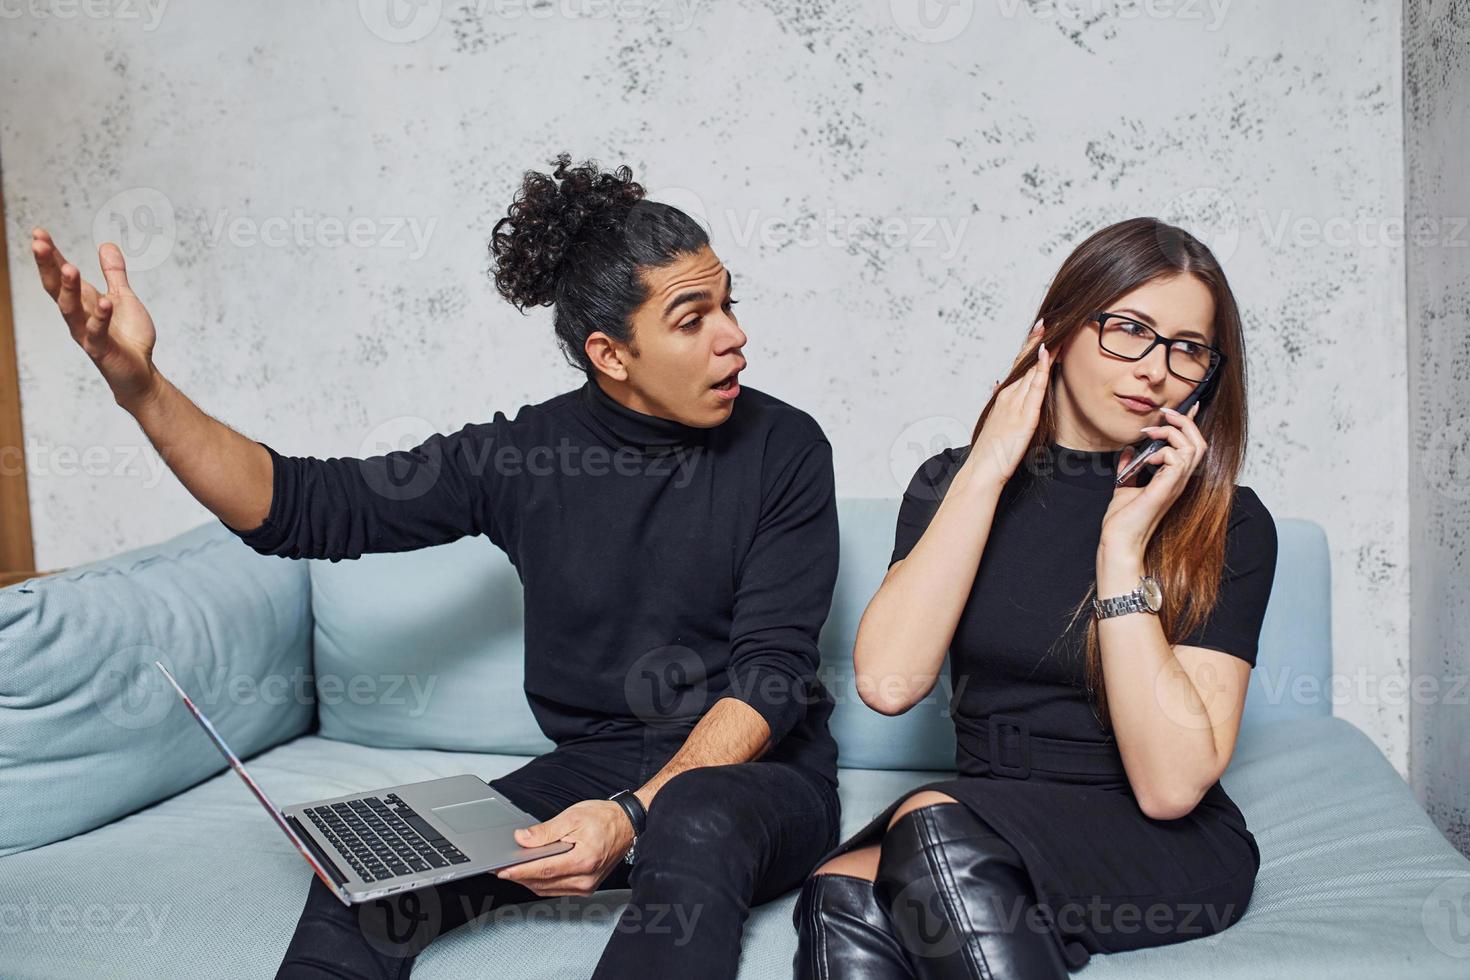 Man with curly hair and woman that in black clothes sitting with laptop indoors. Guy is angry photo